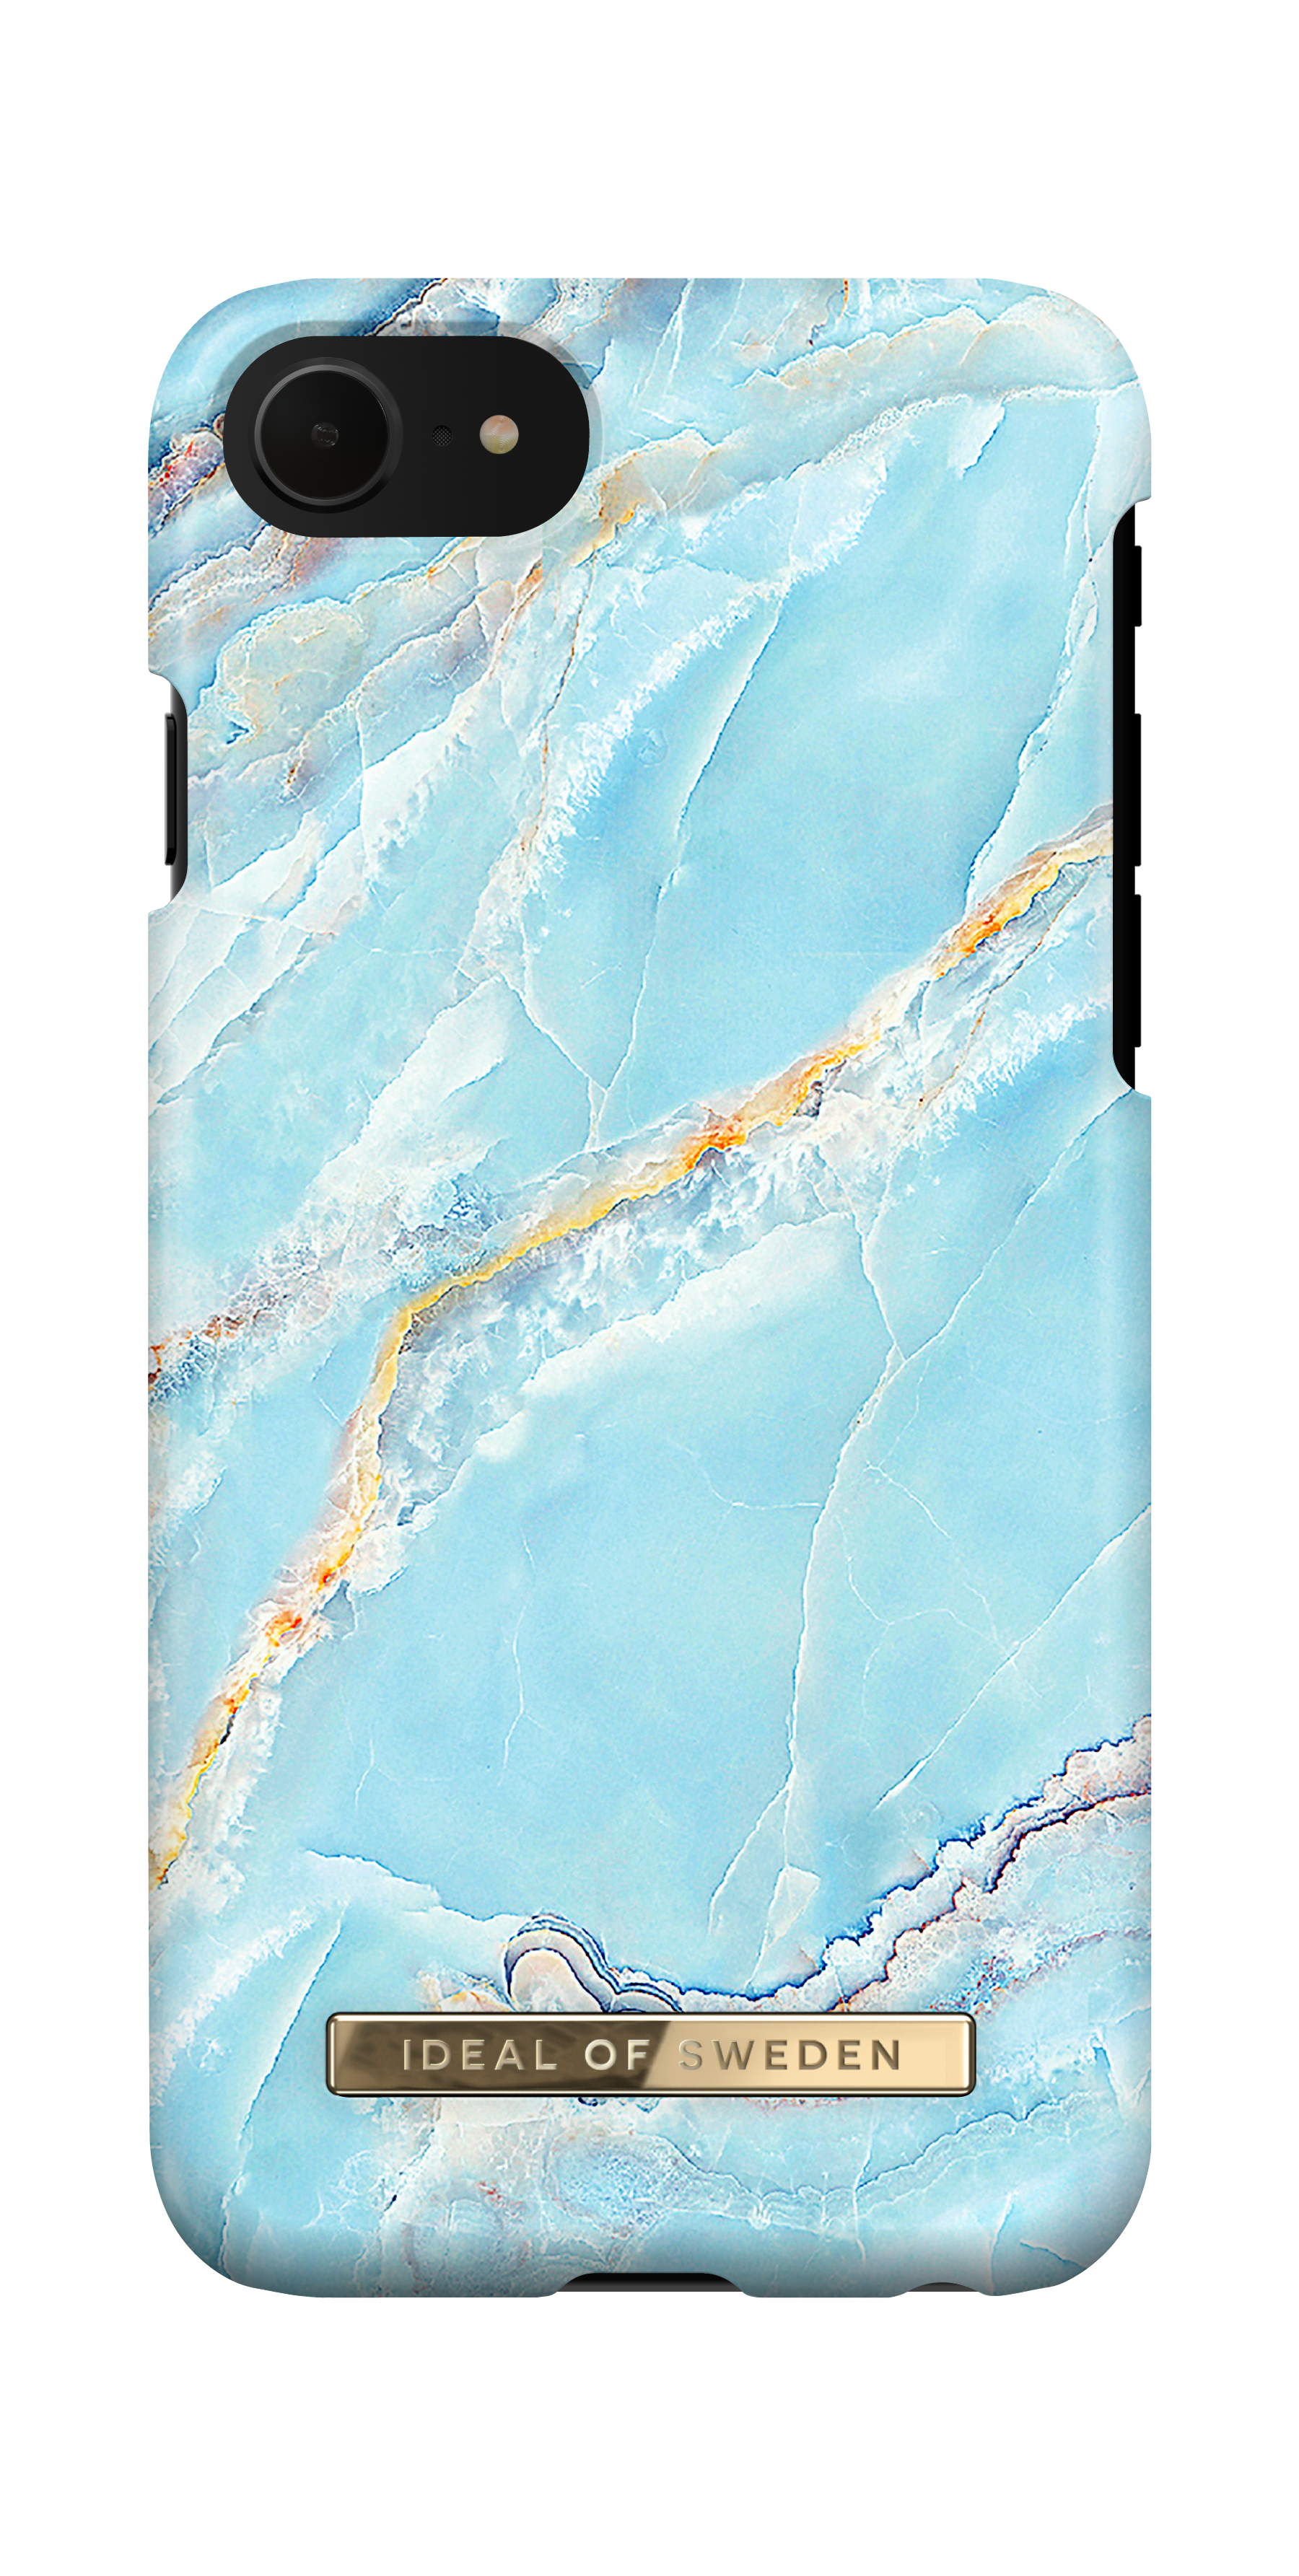 IDEAL OF SWEDEN Apple, Marble Island 8/7/6/6s/SE, IDFCS17-I7-57, Backcover, Paradise IPhone